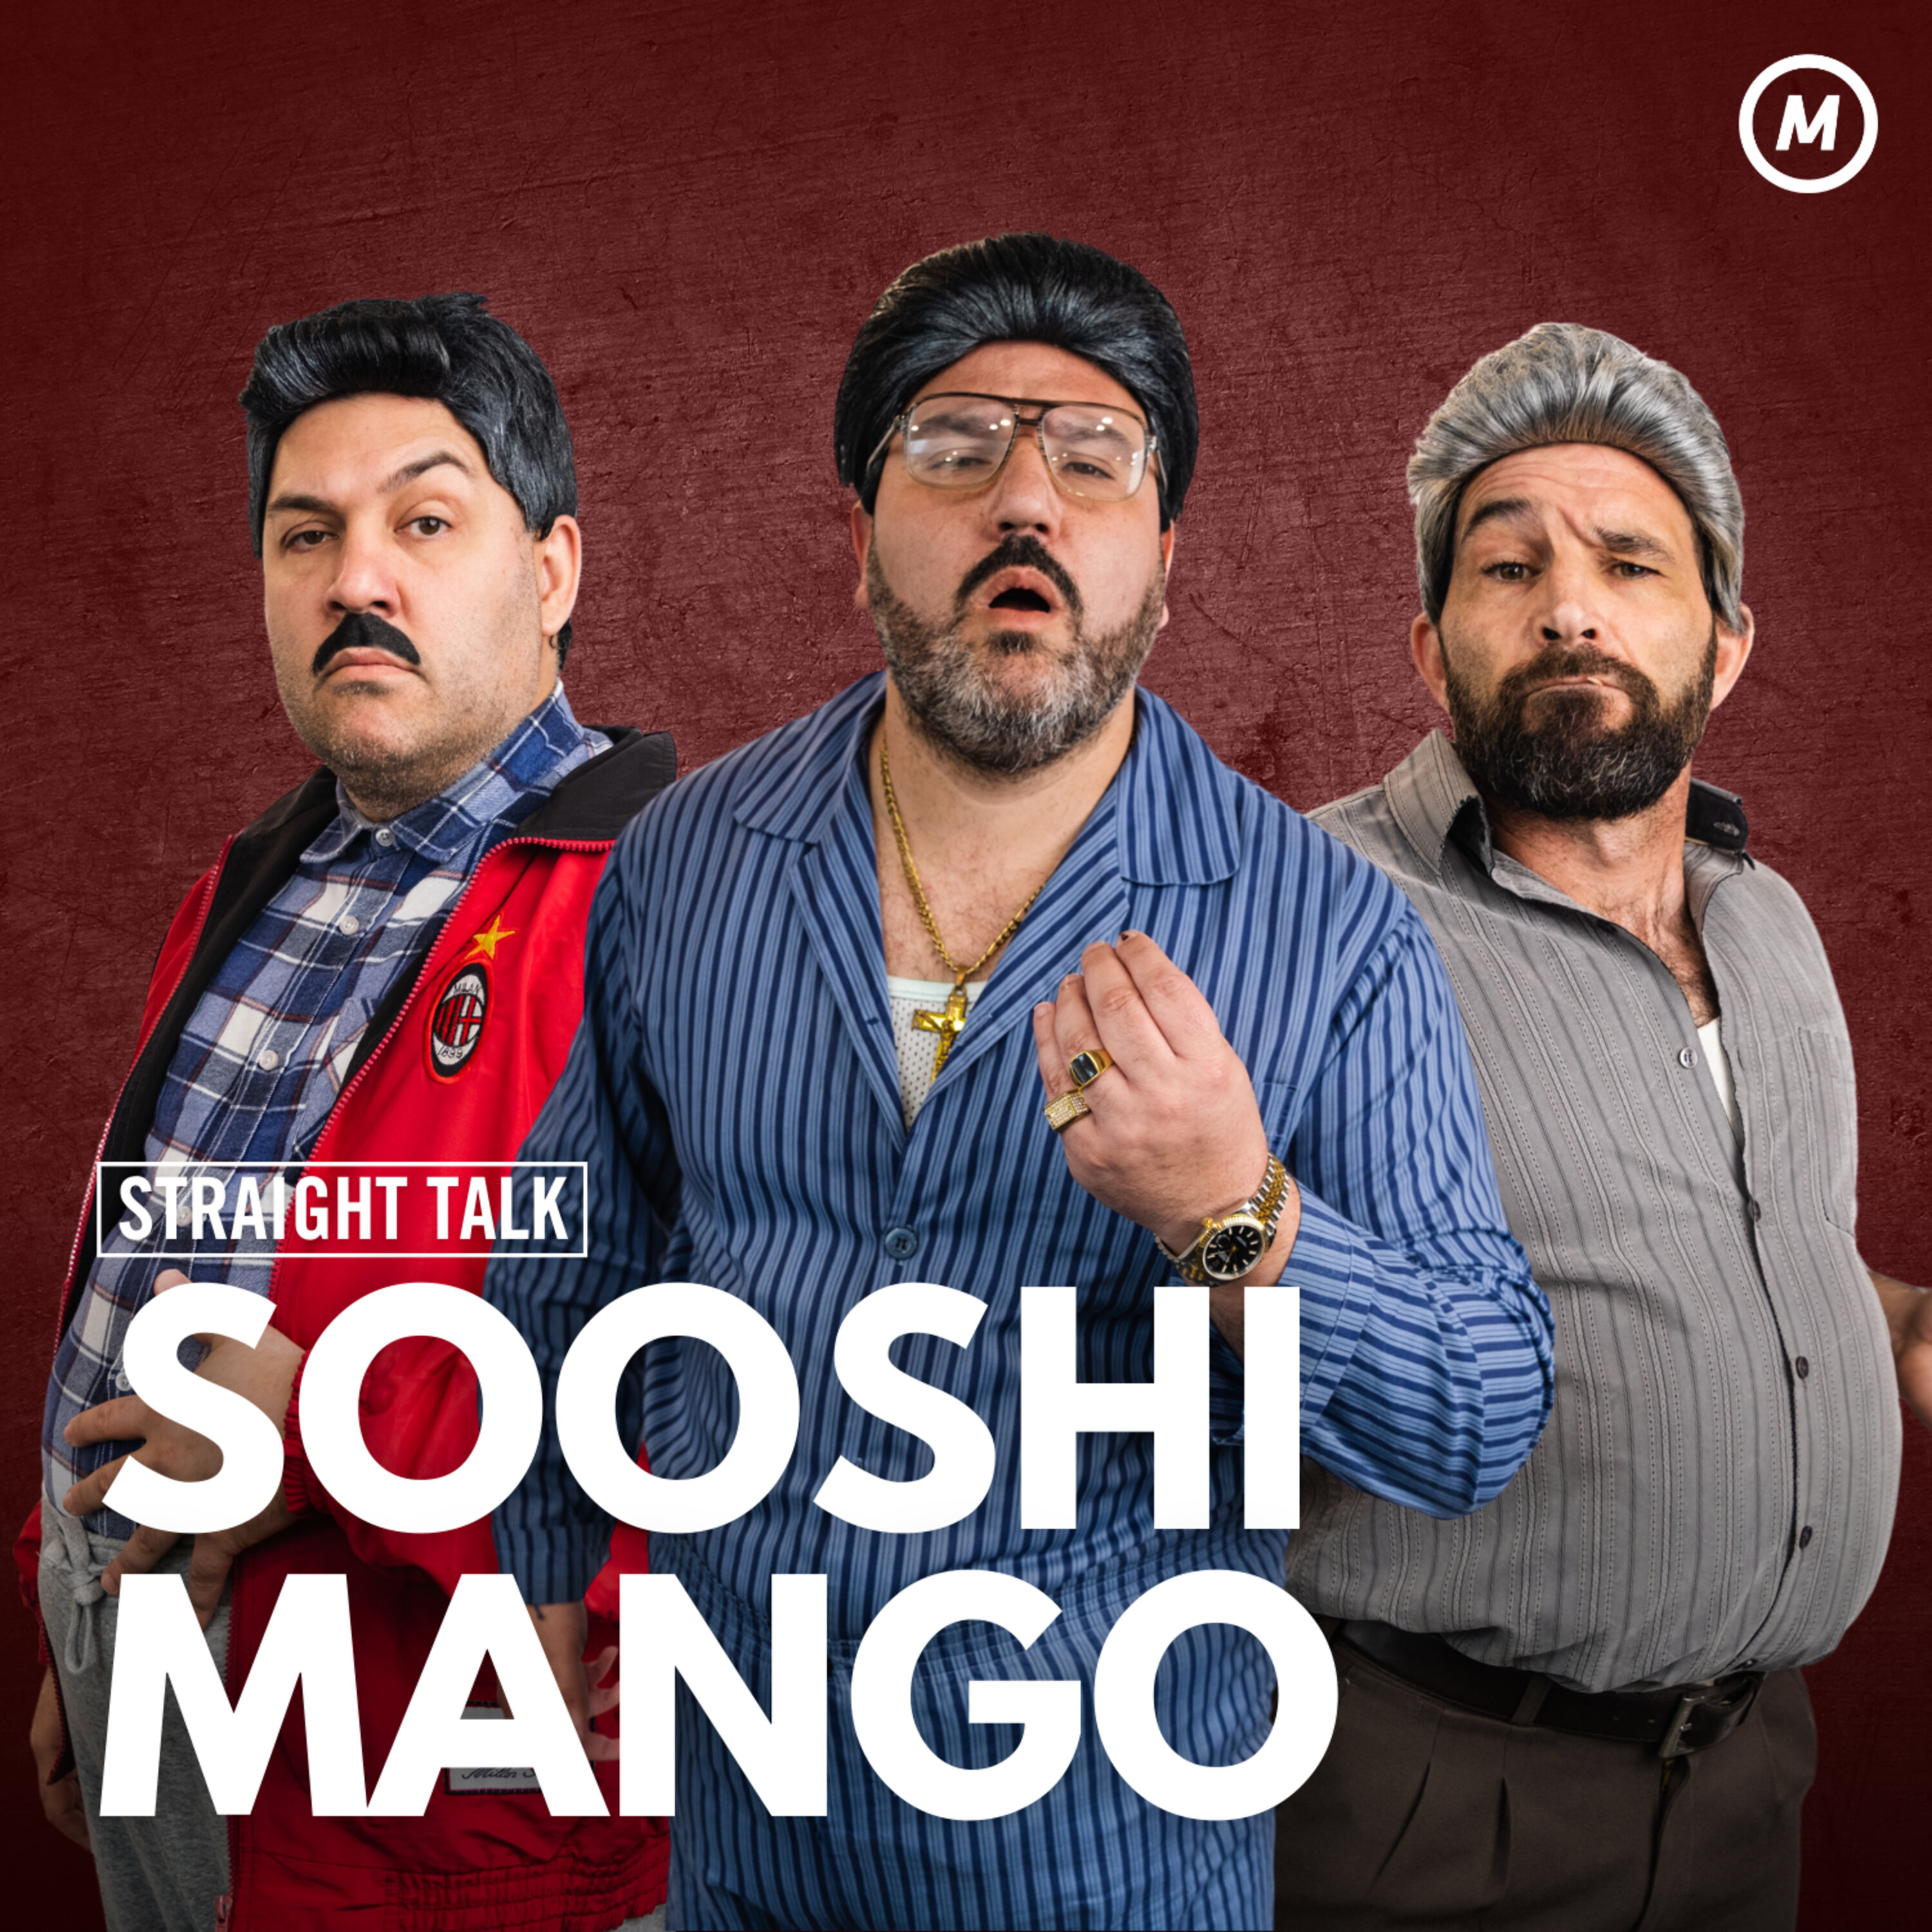 #58 Comedy trio Sooshi Mango: sold-out arena’s, ethnic dads, internet creators